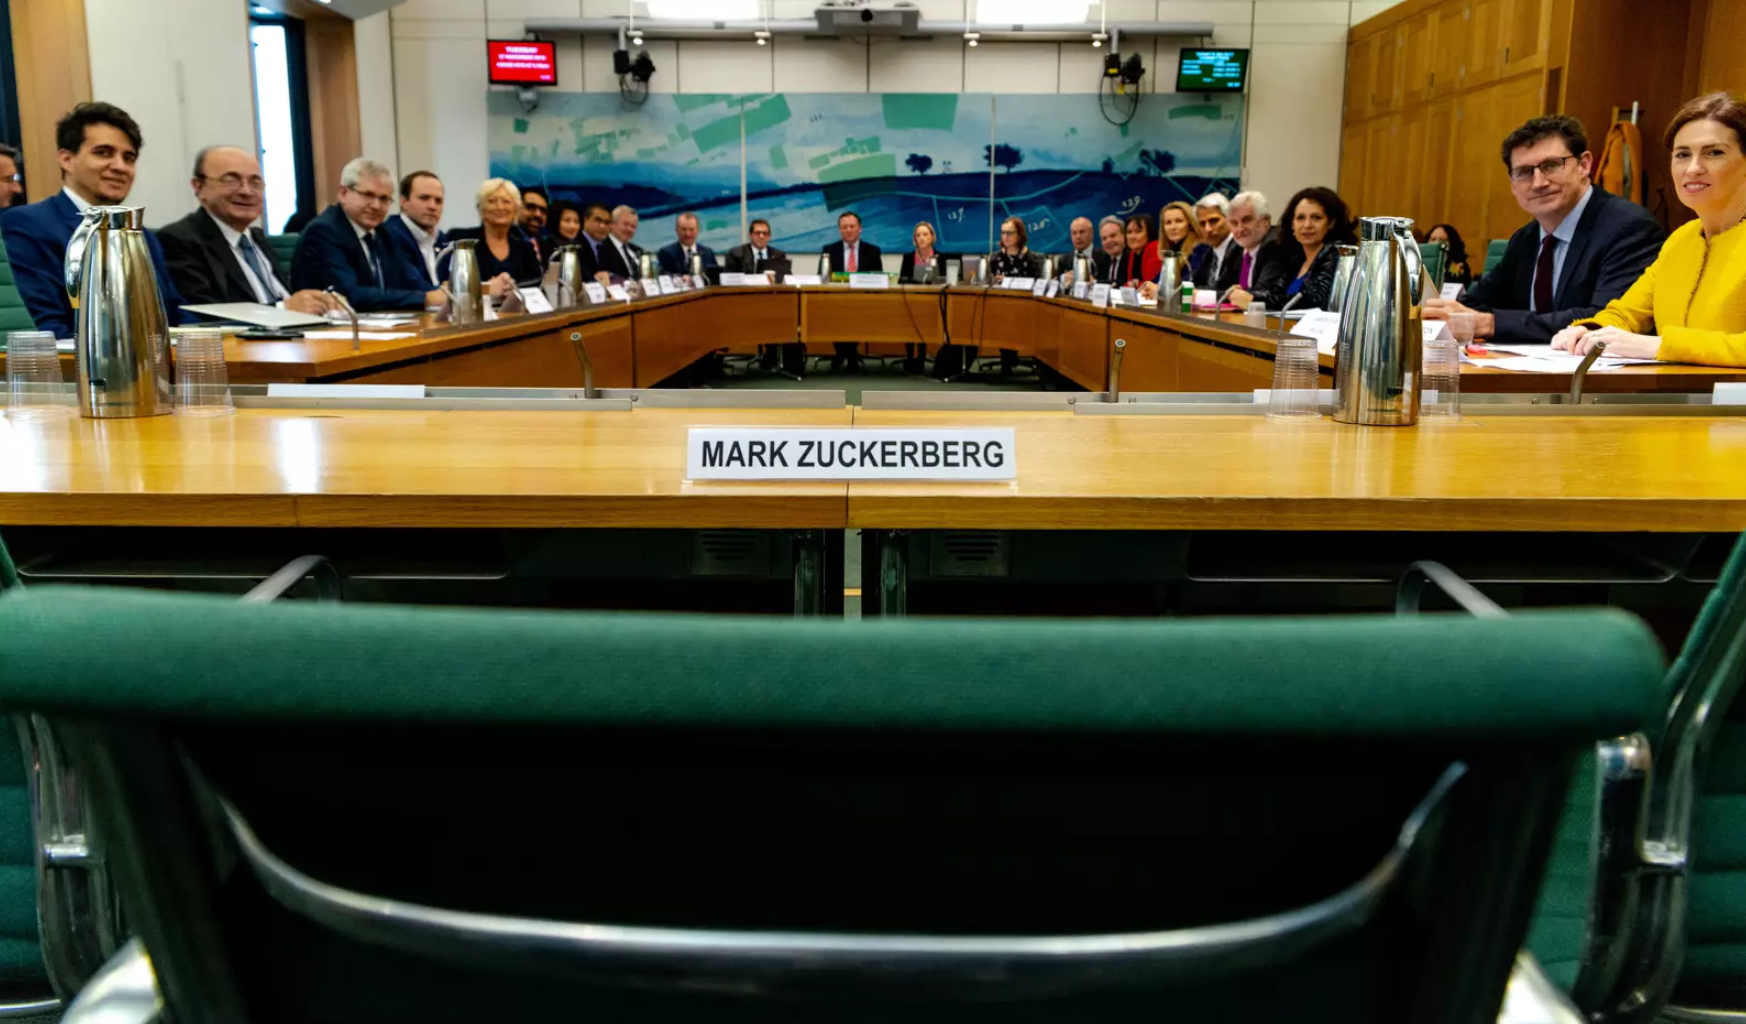 An empty chair represents Mark Zuckerberg's refusal to attend a hearing in the U.K. parliament, where representatives from nine countries gathered to demand answers from Facebook on Nov. 27 in London. (Gabriel Sainhas, House of Commons)